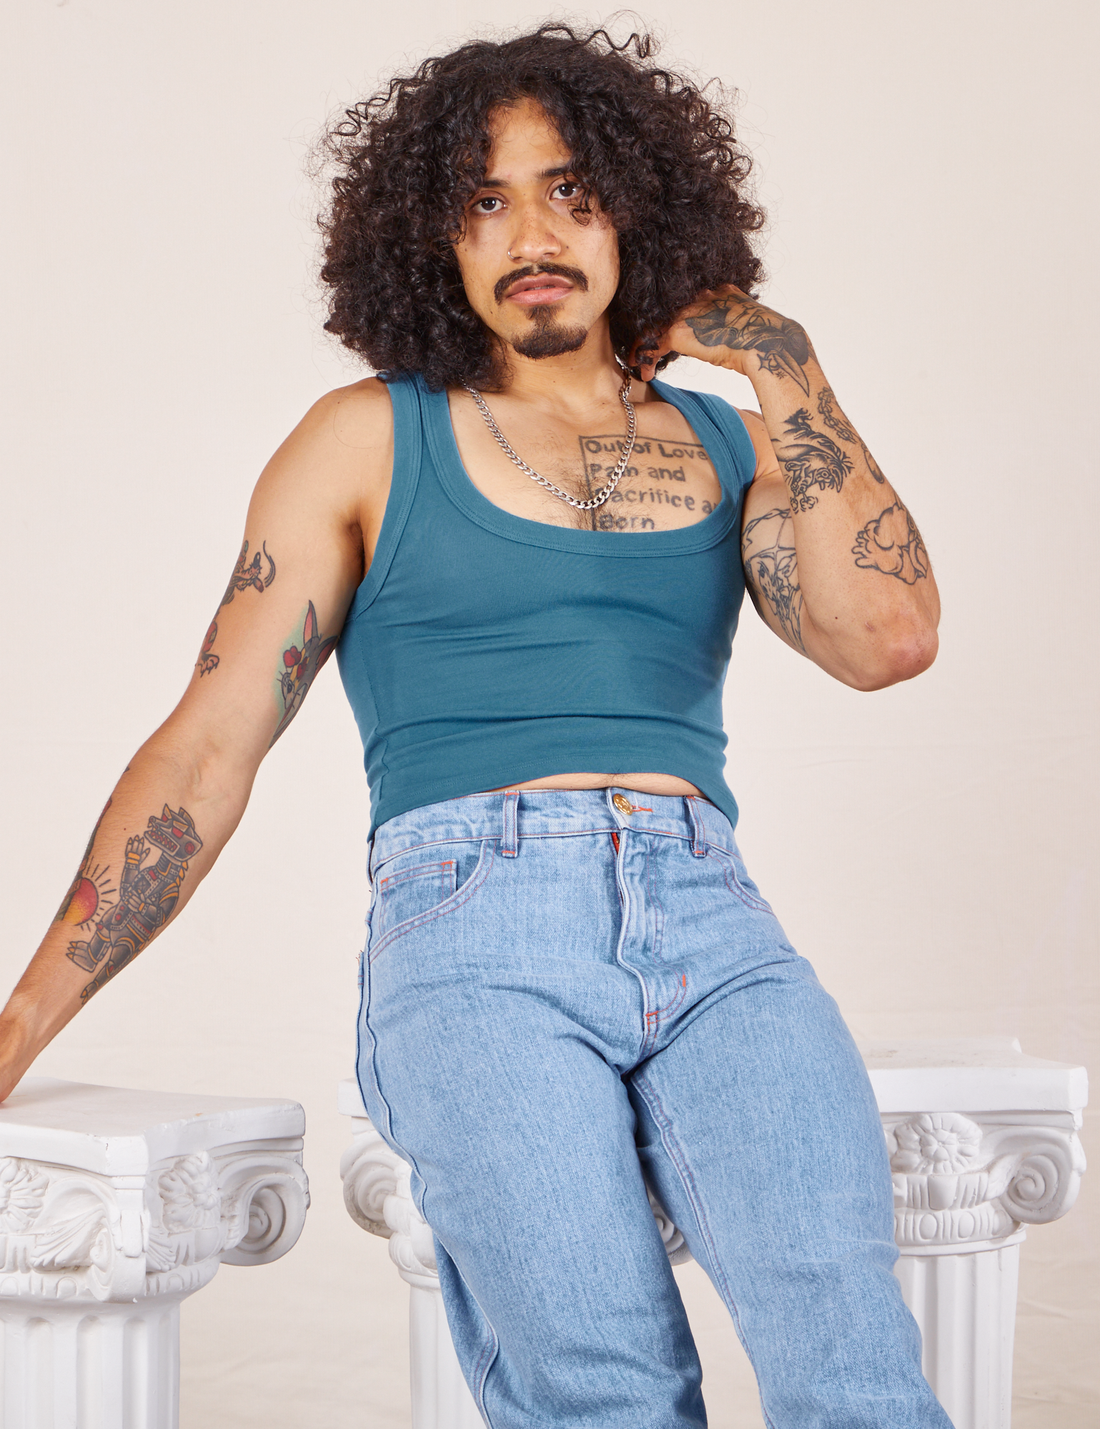 Jesse is 5'8" and wearing XS Cropped Tank Top in Marine Blue